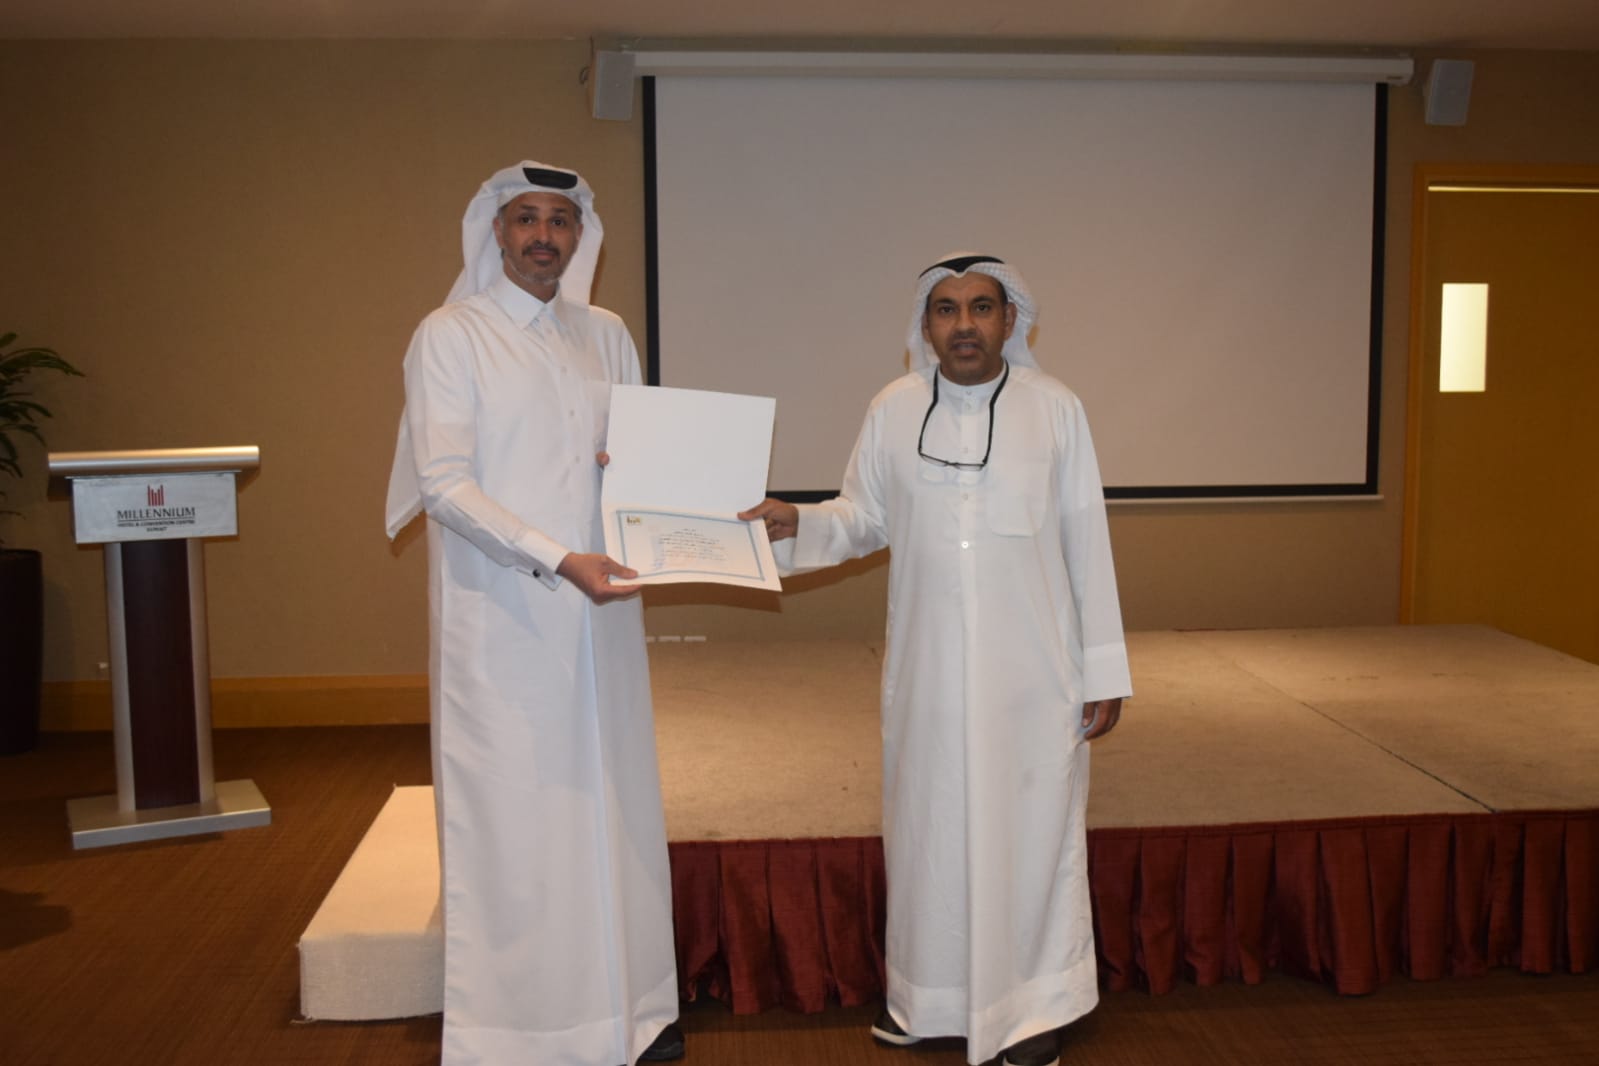 How to be a diplomatic in your life program (Kuwait) done at 01/04/2019